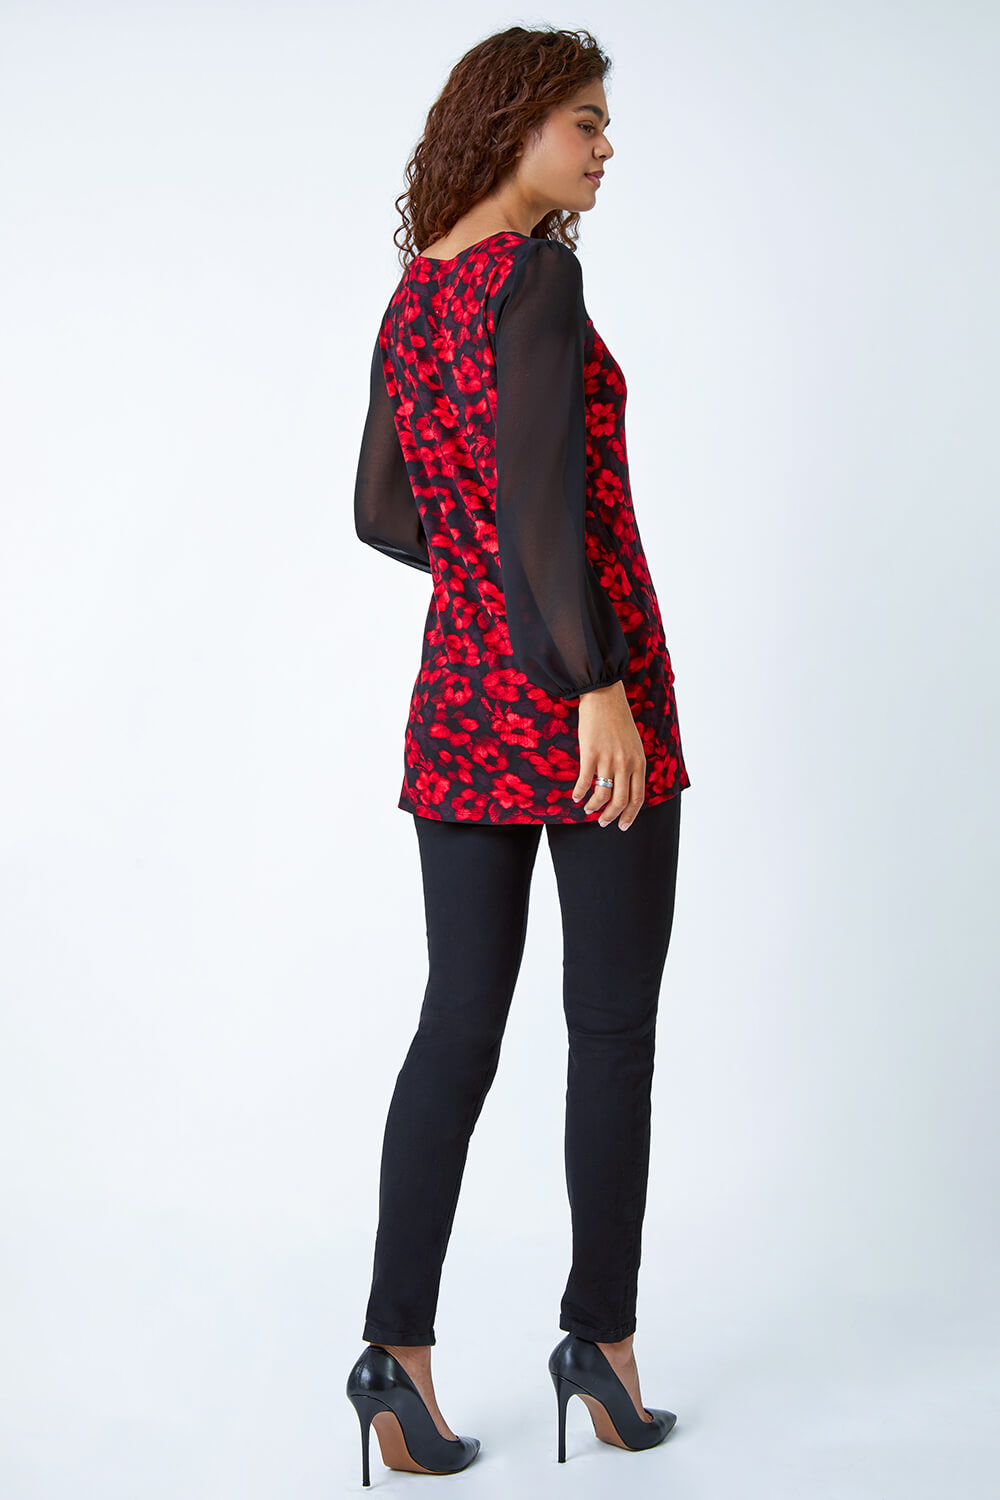 Red Floral Print Chiffon Sleeve Stretch Top, Image 3 of 5